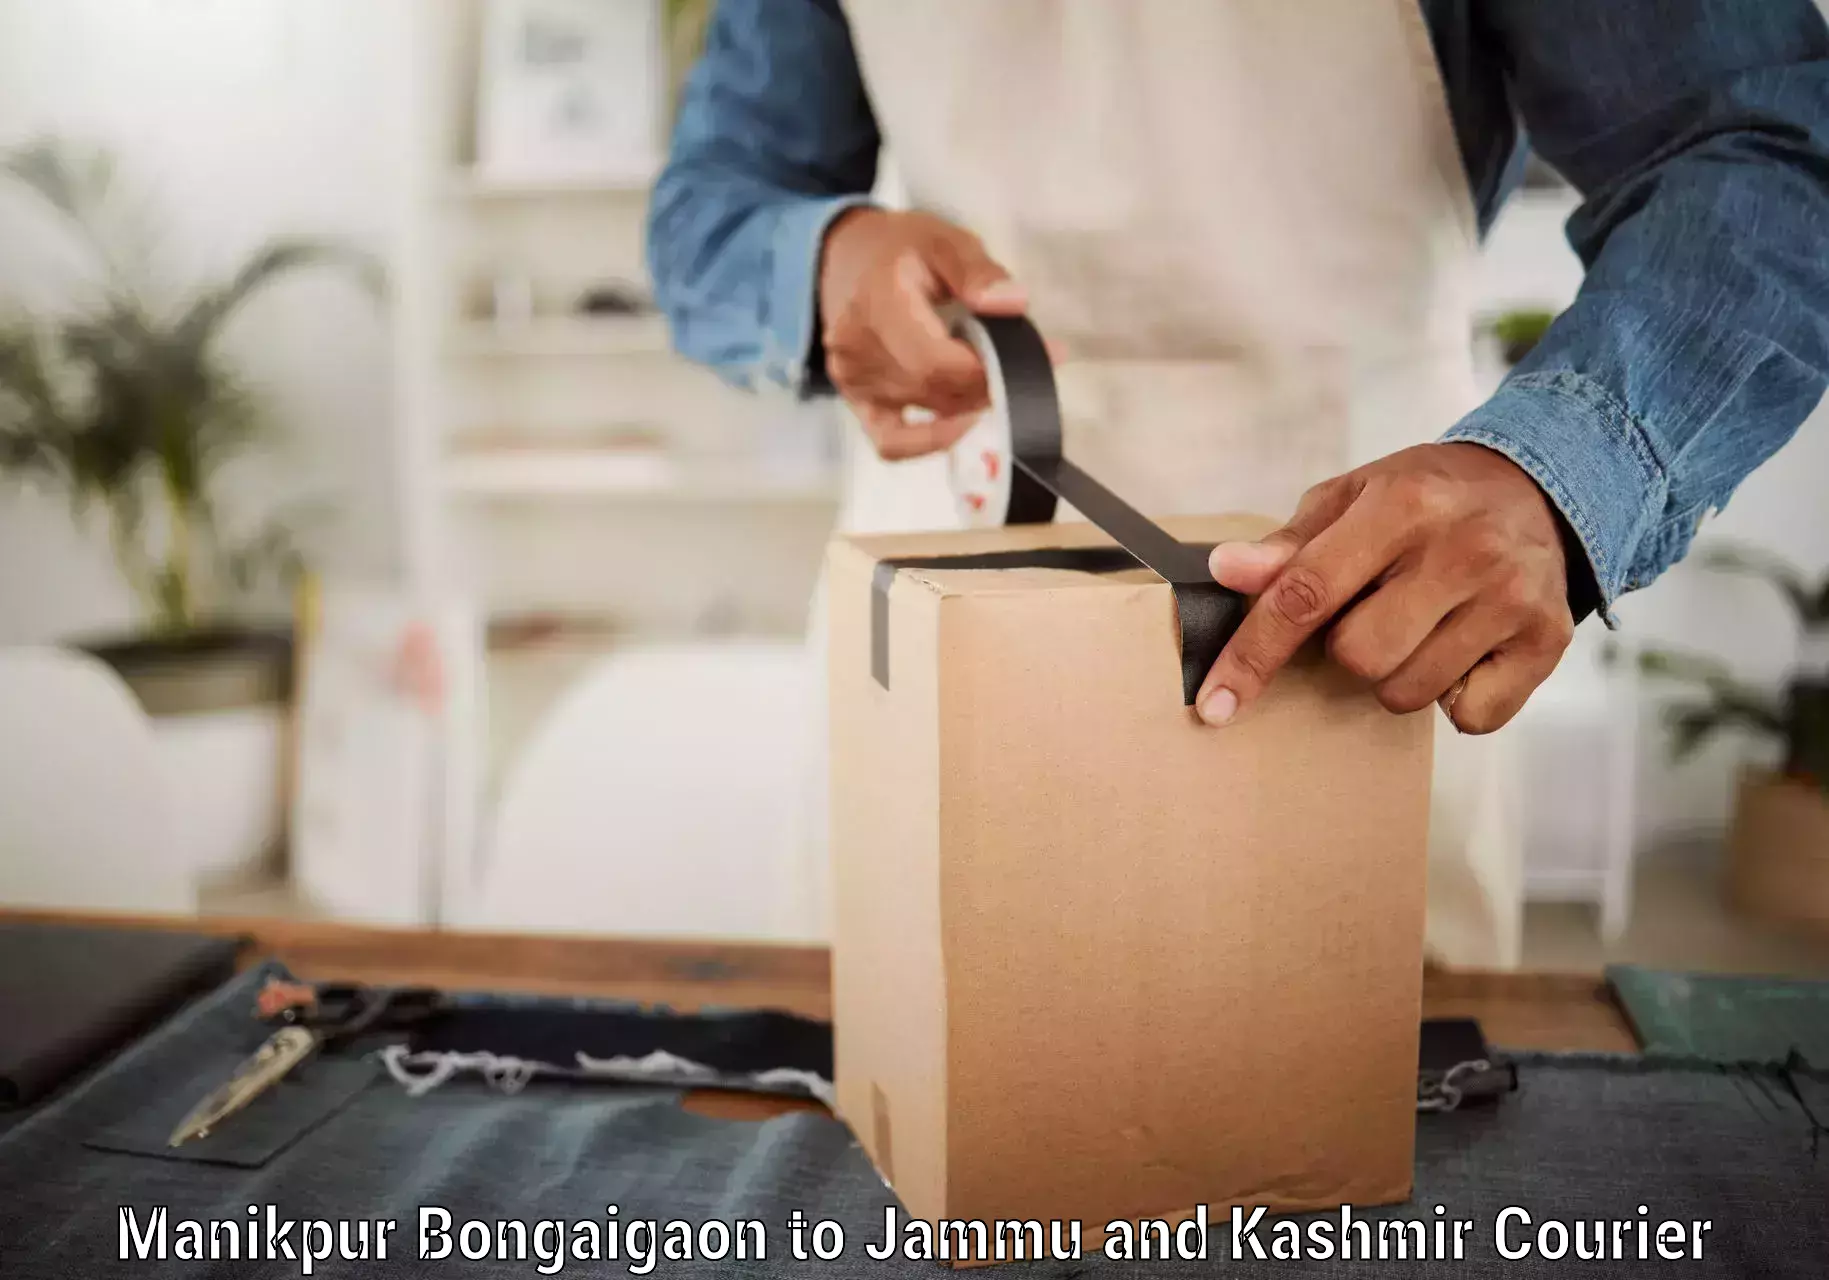 On-demand delivery Manikpur Bongaigaon to Jammu and Kashmir